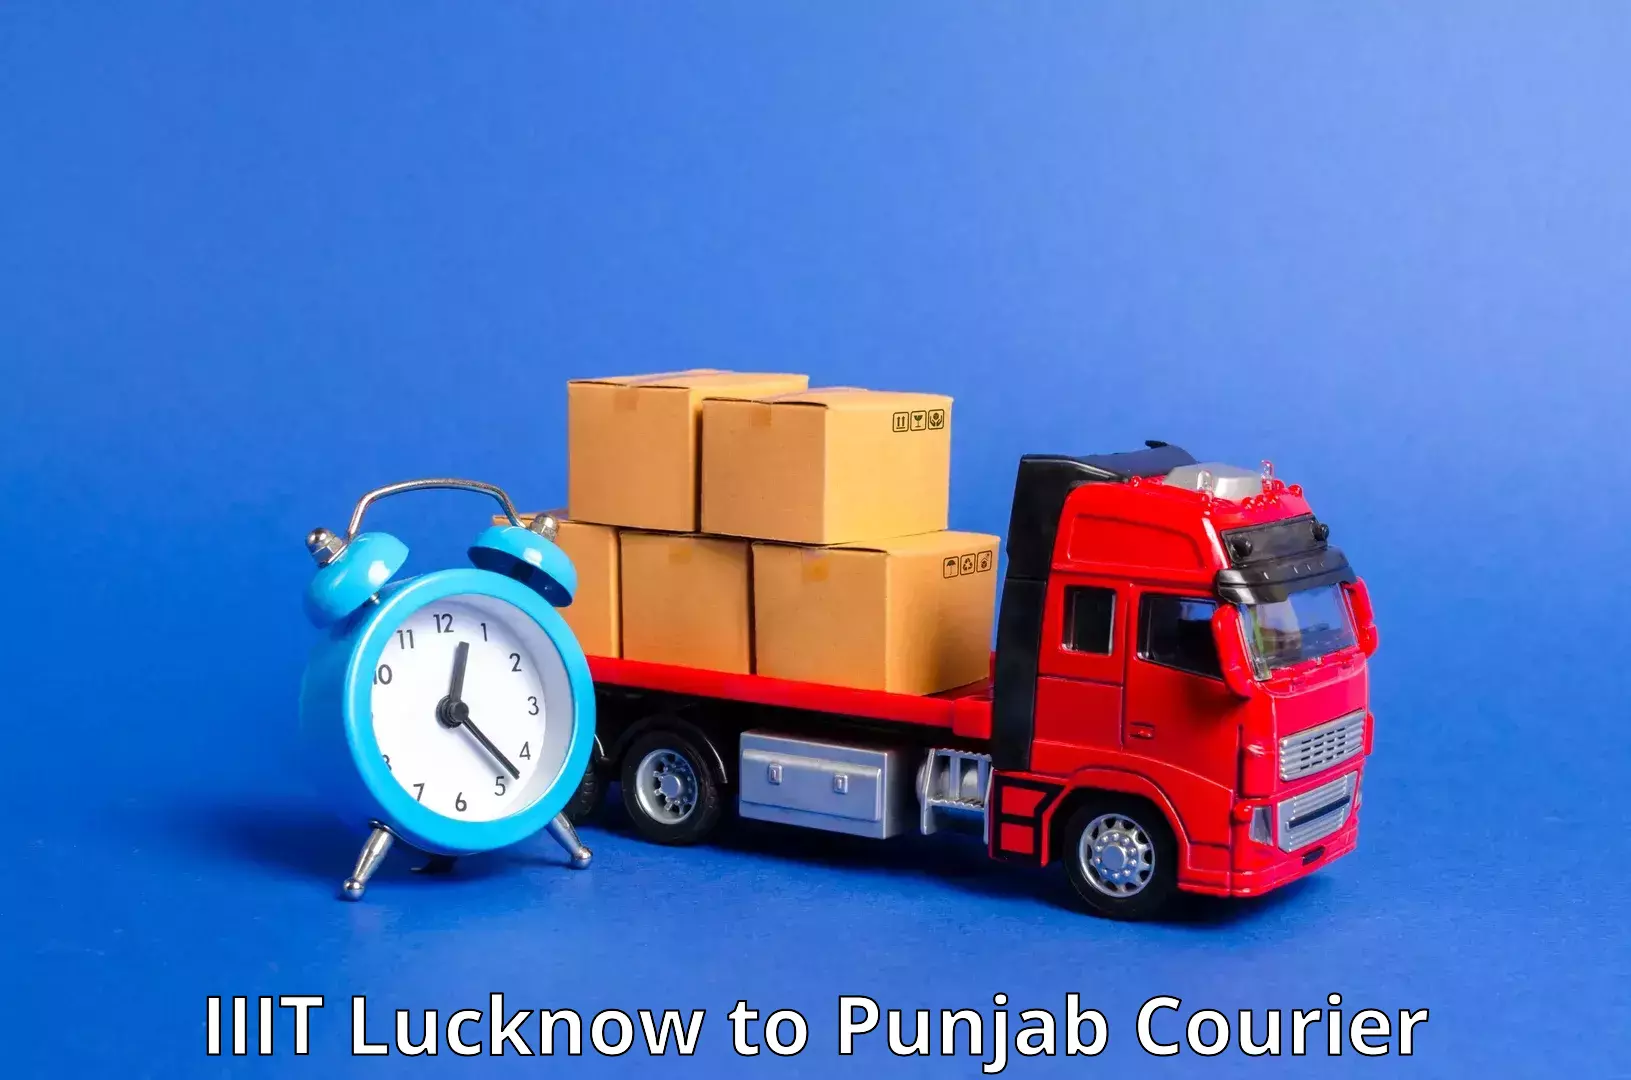 Tailored shipping plans IIIT Lucknow to Punjab